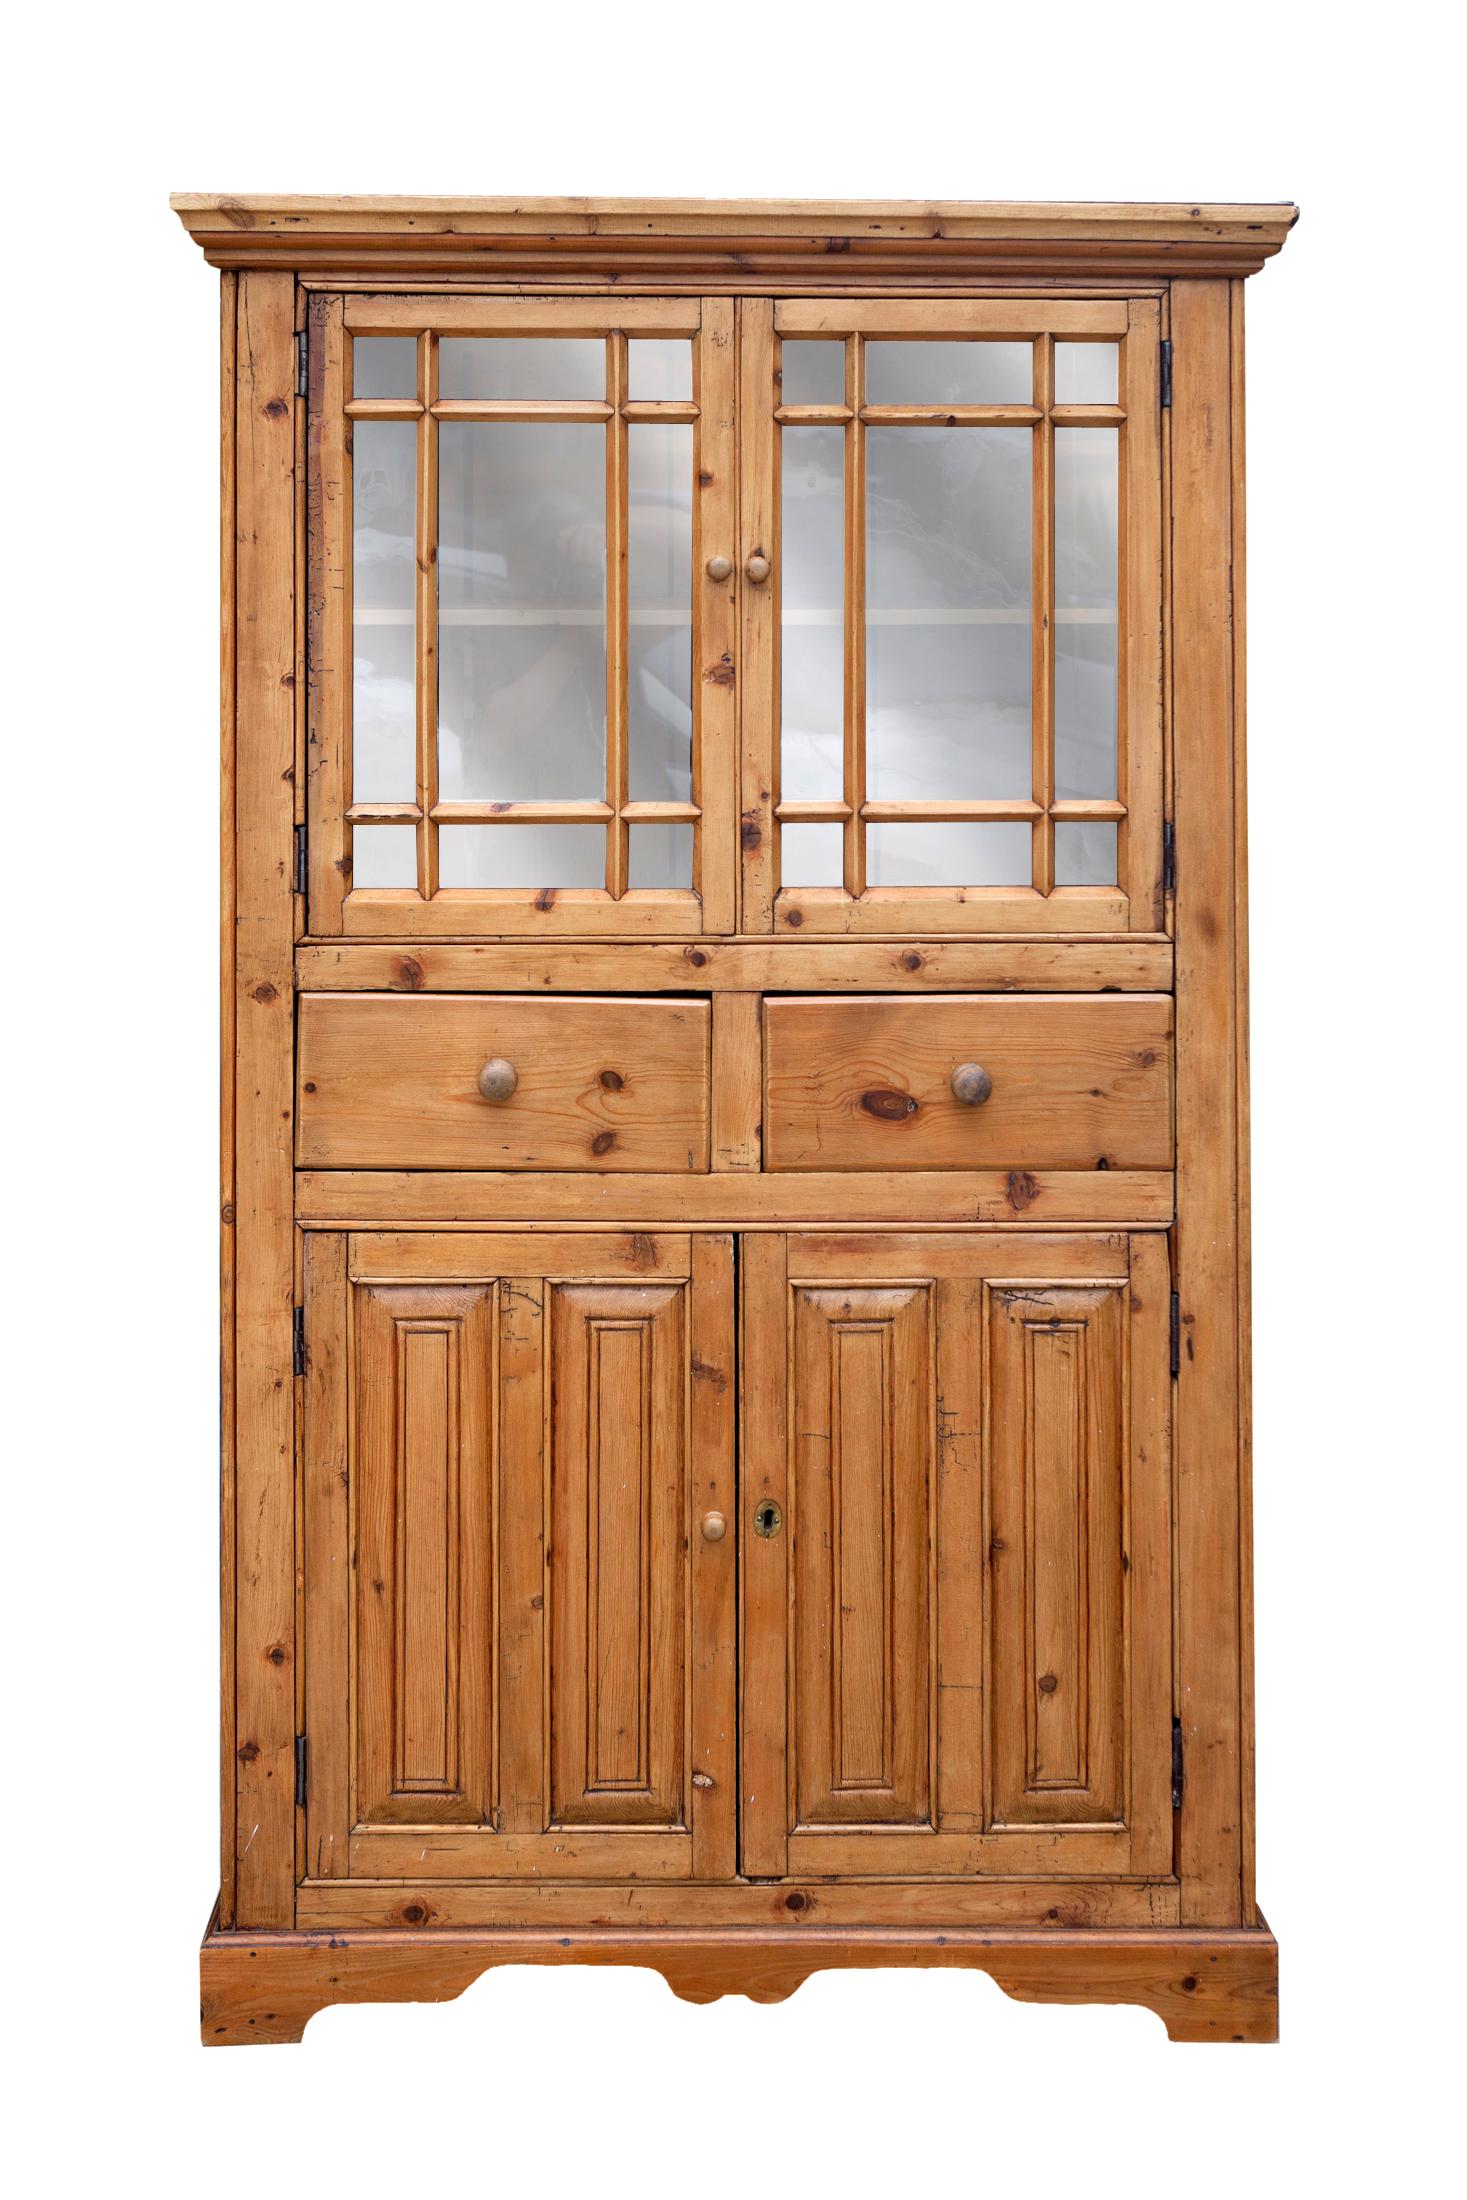 Charming antique Irish pine hutch featuring the original glass paned cabinet doors above with shelf for display & storage.
Beautiful, aged patina with some natural distressing. Very mellow soft hand to the finish. A cabinetmakers piece with pegged